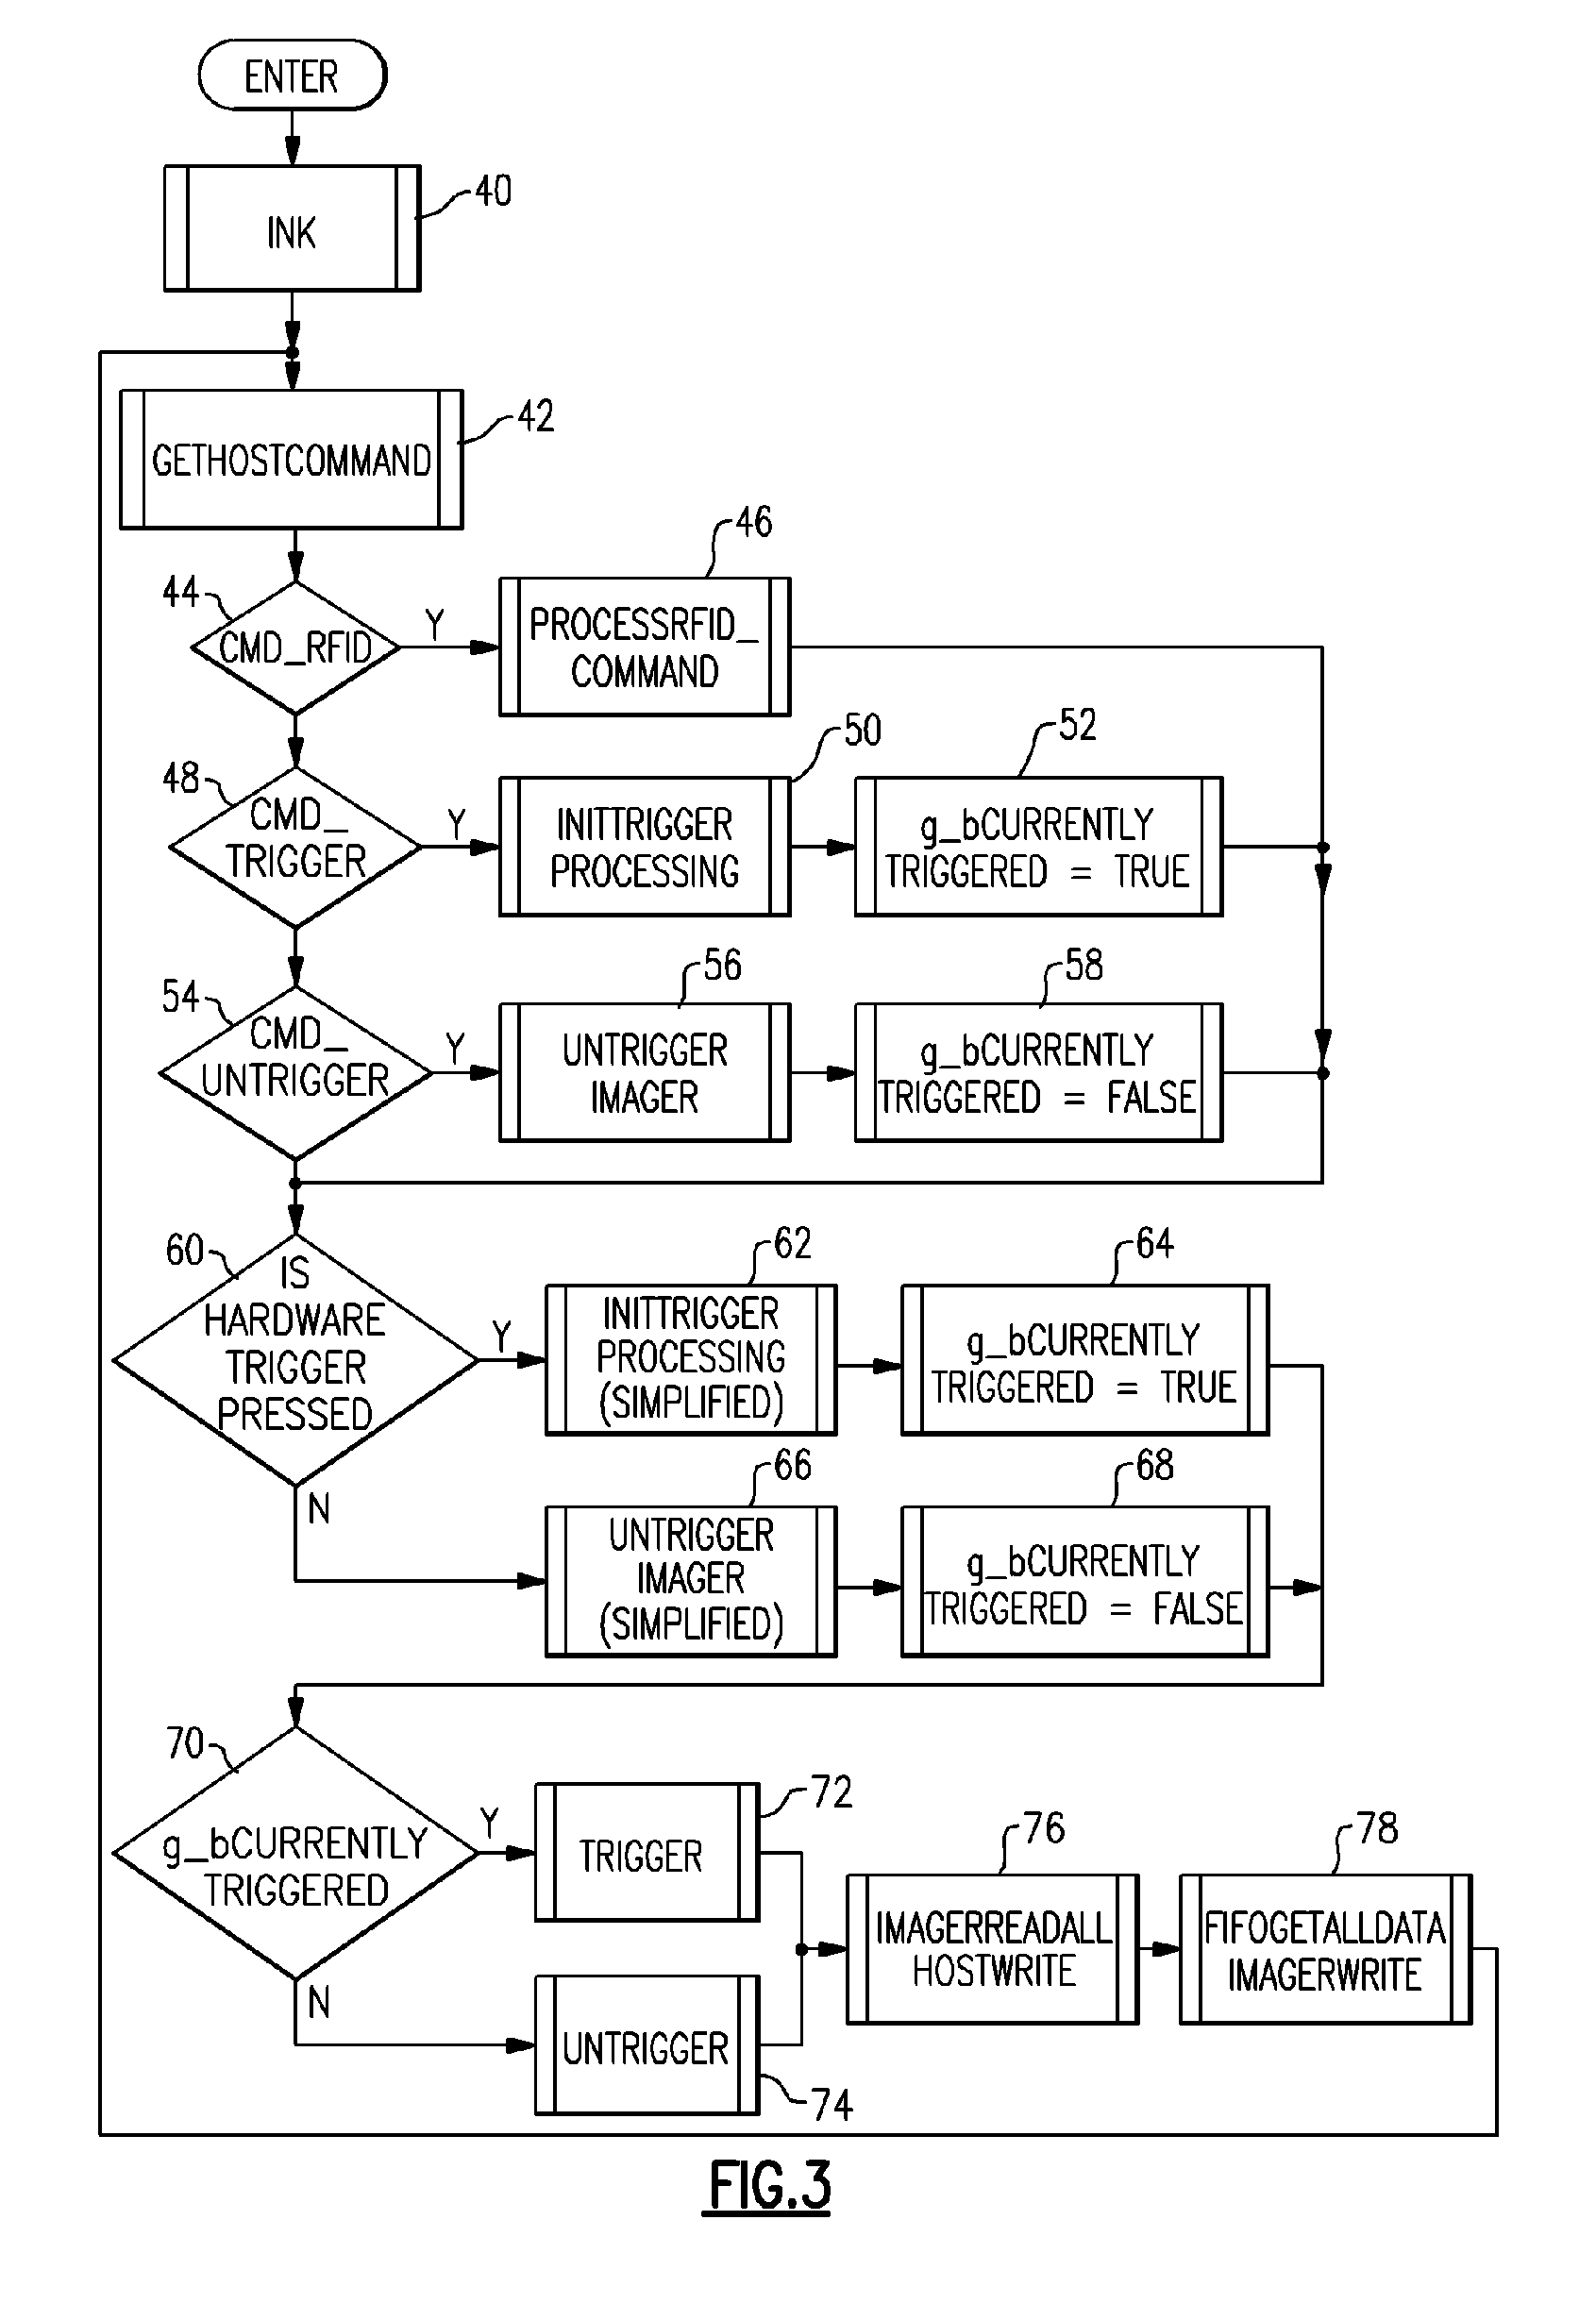 Combined radio frequency identification and optical imaging module